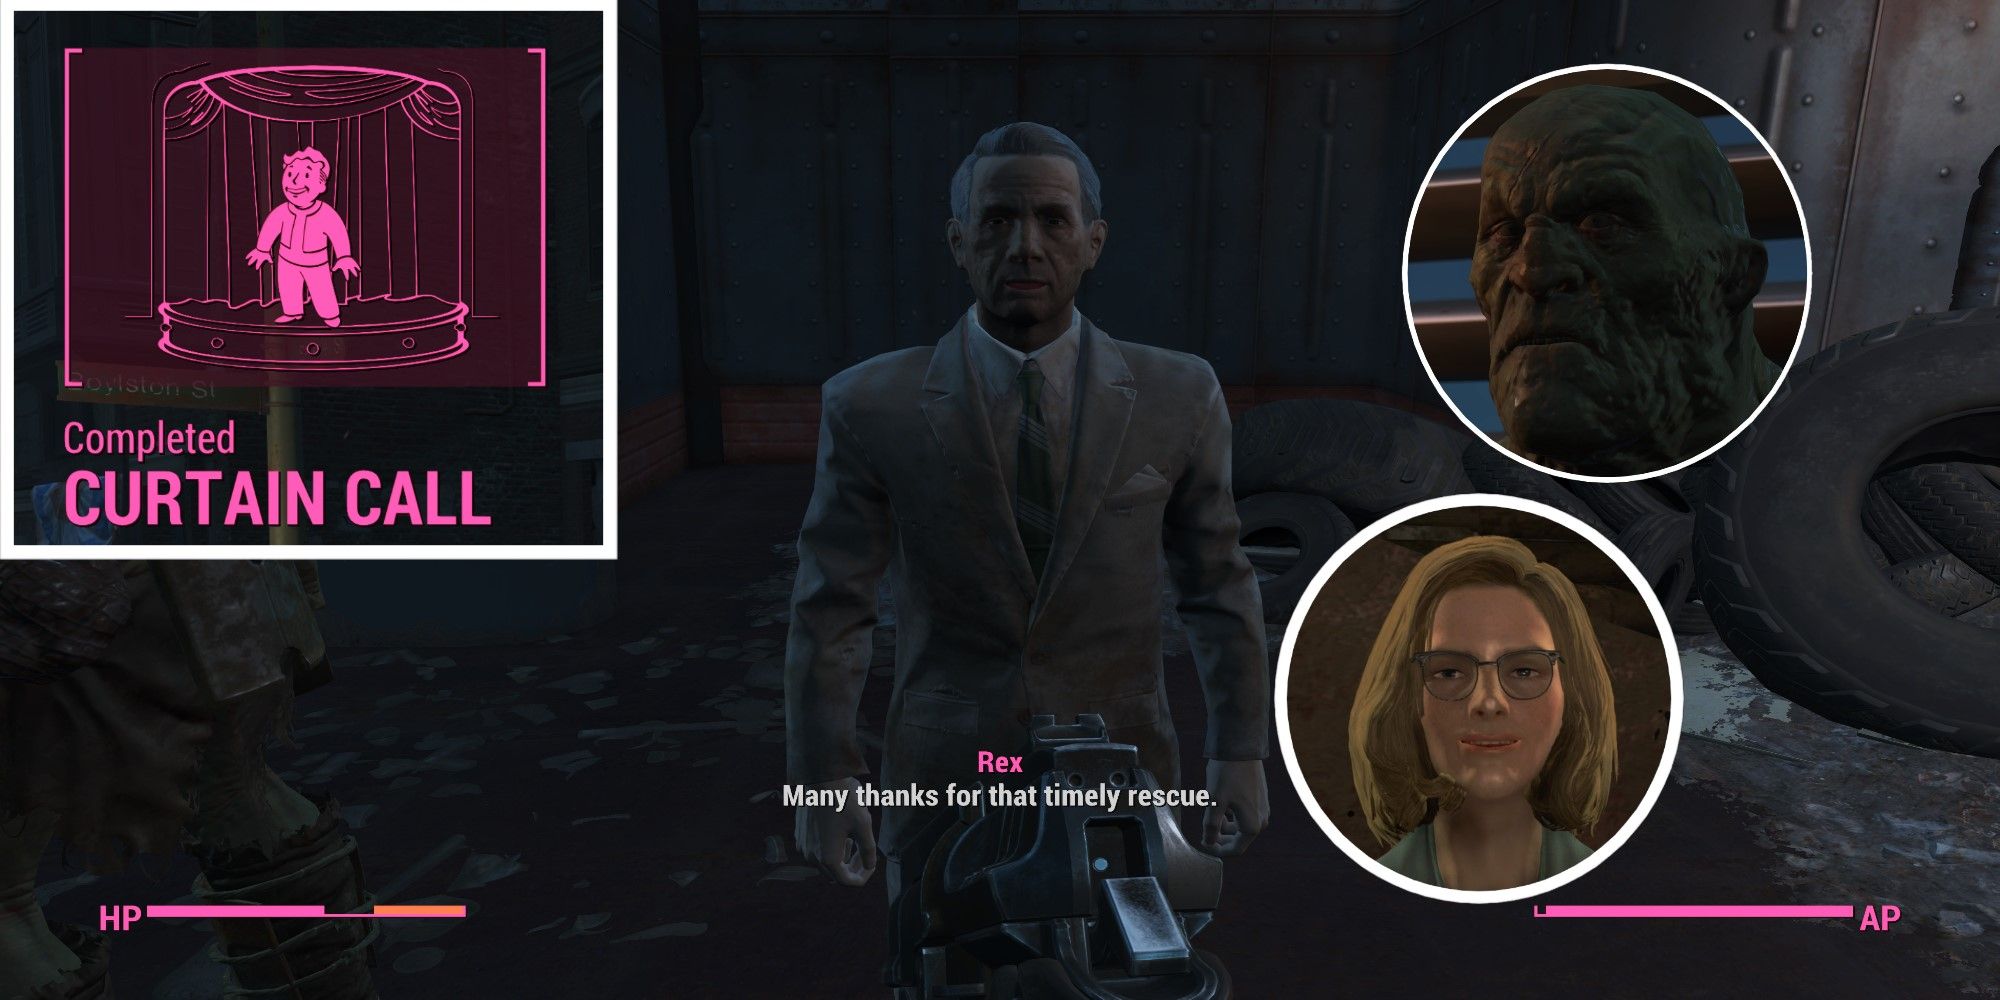 Fallout 4 Split Image Rex Goodman thanking player with Anne Hargraves Strong and Completed Curtain Call notification